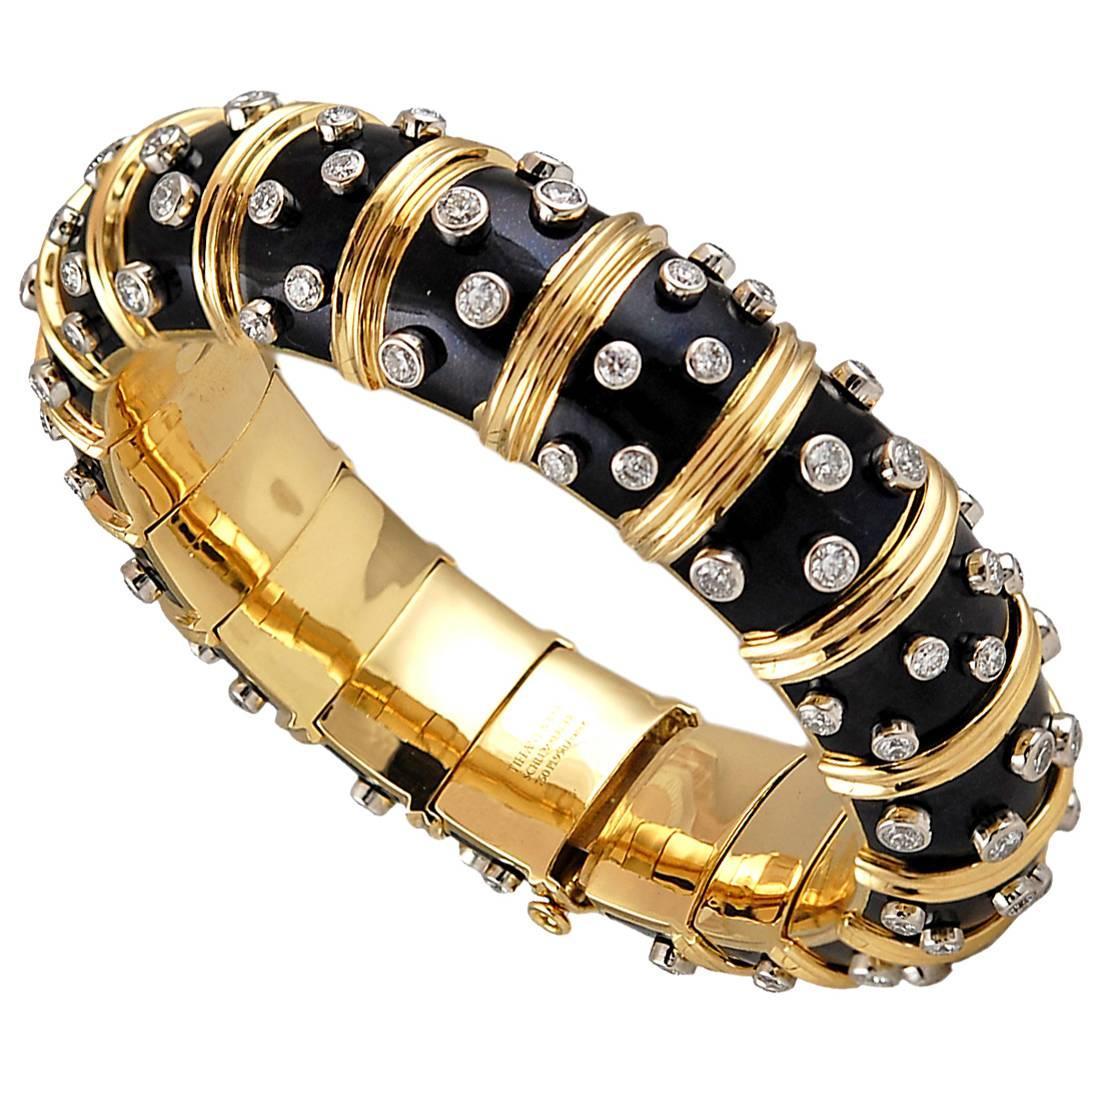 Tiffany and Co. Jean Schlumberger Black Enamel Bangle For Sale at 1stdibs